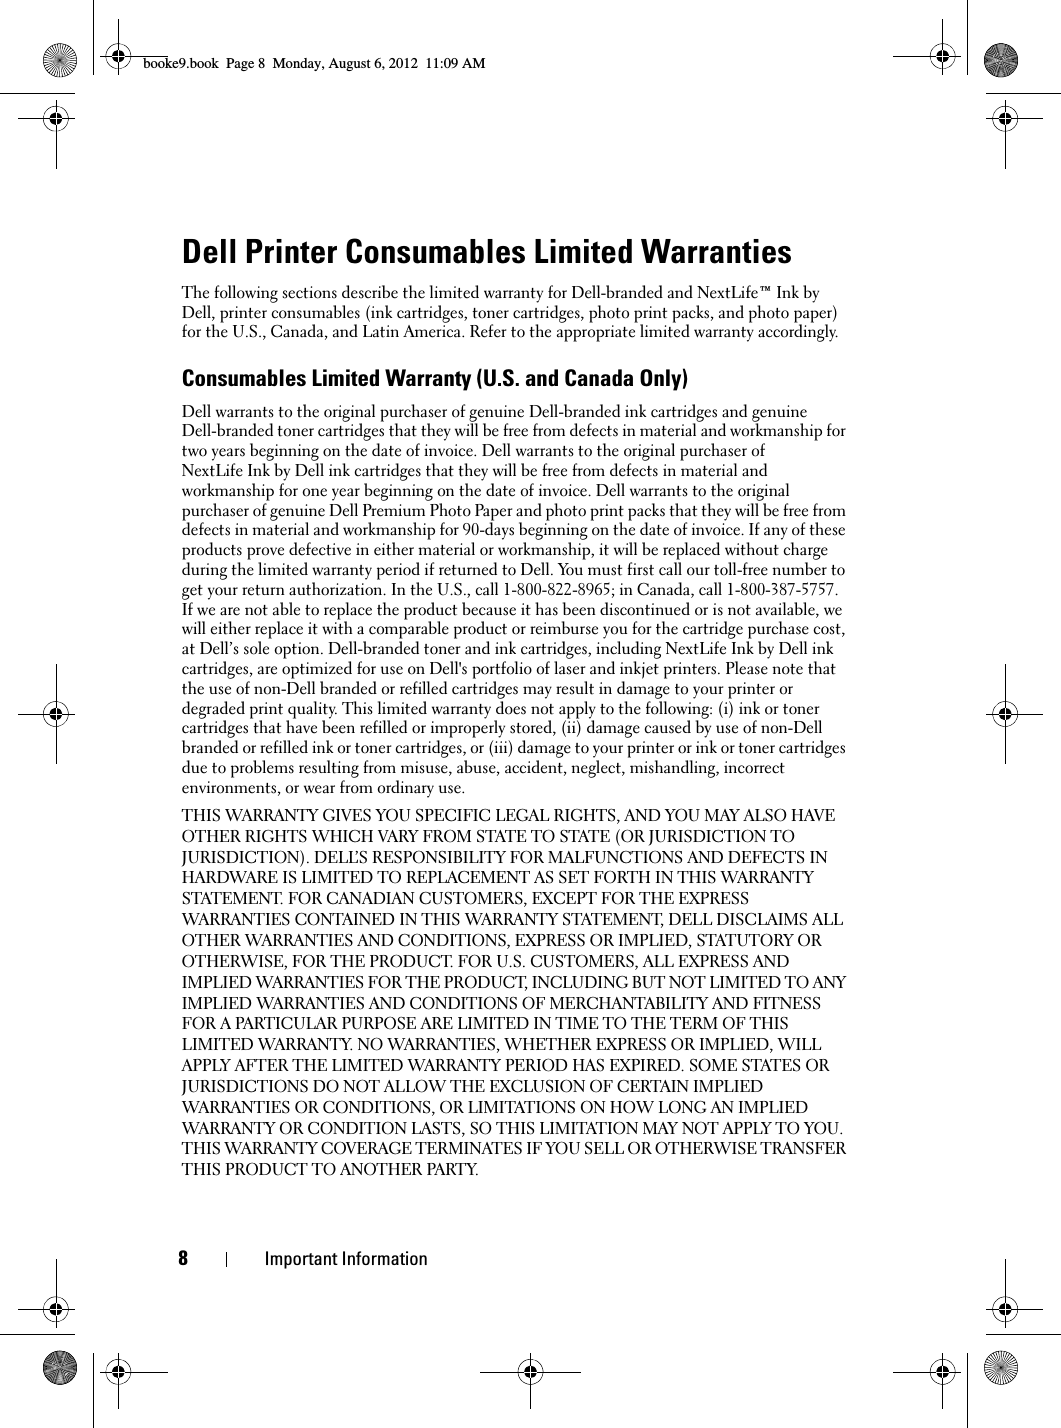 8Important InformationDell Printer Consumables Limited WarrantiesThe following sections describe the limited warranty for Dell-branded and NextLife™ Ink by Dell, printer consumables (ink cartridges, toner cartridges, photo print packs, and photo paper) for the U.S., Canada, and Latin America. Refer to the appropriate limited warranty accordingly.Consumables Limited Warranty (U.S. and Canada Only)Dell warrants to the original purchaser of genuine Dell-branded ink cartridges and genuineDell-branded toner cartridges that they will be free from defects in material and workmanship for two years beginning on the date of invoice. Dell warrants to the original purchaser of NextLife Ink by Dell ink cartridges that they will be free from defects in material and workmanship for one year beginning on the date of invoice. Dell warrants to the original purchaser of genuine Dell Premium Photo Paper and photo print packs that they will be free from defects in material and workmanship for 90-days beginning on the date of invoice. If any of these products prove defective in either material or workmanship, it will be replaced without charge during the limited warranty period if returned to Dell. You must first call our toll-free number to get your return authorization. In the U.S., call 1-800-822-8965; in Canada, call 1-800-387-5757. If we are not able to replace the product because it has been discontinued or is not available, we will either replace it with a comparable product or reimburse you for the cartridge purchase cost, at Dell’s sole option. Dell-branded toner and ink cartridges, including NextLife Ink by Dell ink cartridges, are optimized for use on Dell&apos;s portfolio of laser and inkjet printers. Please note that the use of non-Dell branded or refilled cartridges may result in damage to your printer or degraded print quality. This limited warranty does not apply to the following: (i) ink or toner cartridges that have been refilled or improperly stored, (ii) damage caused by use of non-Dell branded or refilled ink or toner cartridges, or (iii) damage to your printer or ink or toner cartridges due to problems resulting from misuse, abuse, accident, neglect, mishandling, incorrect environments, or wear from ordinary use.THIS WARRANTY GIVES YOU SPECIFIC LEGAL RIGHTS, AND YOU MAY ALSO HAVE OTHER RIGHTS WHICH VARY FROM STATE TO STATE (OR JURISDICTION TO JURISDICTION). DELL’S RESPONSIBILITY FOR MALFUNCTIONS AND DEFECTS IN HARDWARE IS LIMITED TO REPLACEMENT AS SET FORTH IN THIS WARRANTY STATEMENT. FOR CANADIAN CUSTOMERS, EXCEPT FOR THE EXPRESS WARRANTIES CONTAINED IN THIS WARRANTY STATEMENT, DELL DISCLAIMS ALL OTHER WARRANTIES AND CONDITIONS, EXPRESS OR IMPLIED, STATUTORY OR OTHERWISE, FOR THE PRODUCT. FOR U.S. CUSTOMERS, ALL EXPRESS AND IMPLIED WARRANTIES FOR THE PRODUCT, INCLUDING BUT NOT LIMITED TO ANY IMPLIED WARRANTIES AND CONDITIONS OF MERCHANTABILITY AND FITNESS FOR A PARTICULAR PURPOSE ARE LIMITED IN TIME TO THE TERM OF THIS LIMITED WARRANTY. NO WARRANTIES, WHETHER EXPRESS OR IMPLIED, WILL APPLY AFTER THE LIMITED WARRANTY PERIOD HAS EXPIRED. SOME STATES OR JURISDICTIONS DO NOT ALLOW THE EXCLUSION OF CERTAIN IMPLIED WARRANTIES OR CONDITIONS, OR LIMITATIONS ON HOW LONG AN IMPLIED WARRANTY OR CONDITION LASTS, SO THIS LIMITATION MAY NOT APPLY TO YOU. THIS WARRANTY COVERAGE TERMINATES IF YOU SELL OR OTHERWISE TRANSFER THIS PRODUCT TO ANOTHER PARTY.booke9.book  Page 8  Monday, August 6, 2012  11:09 AM